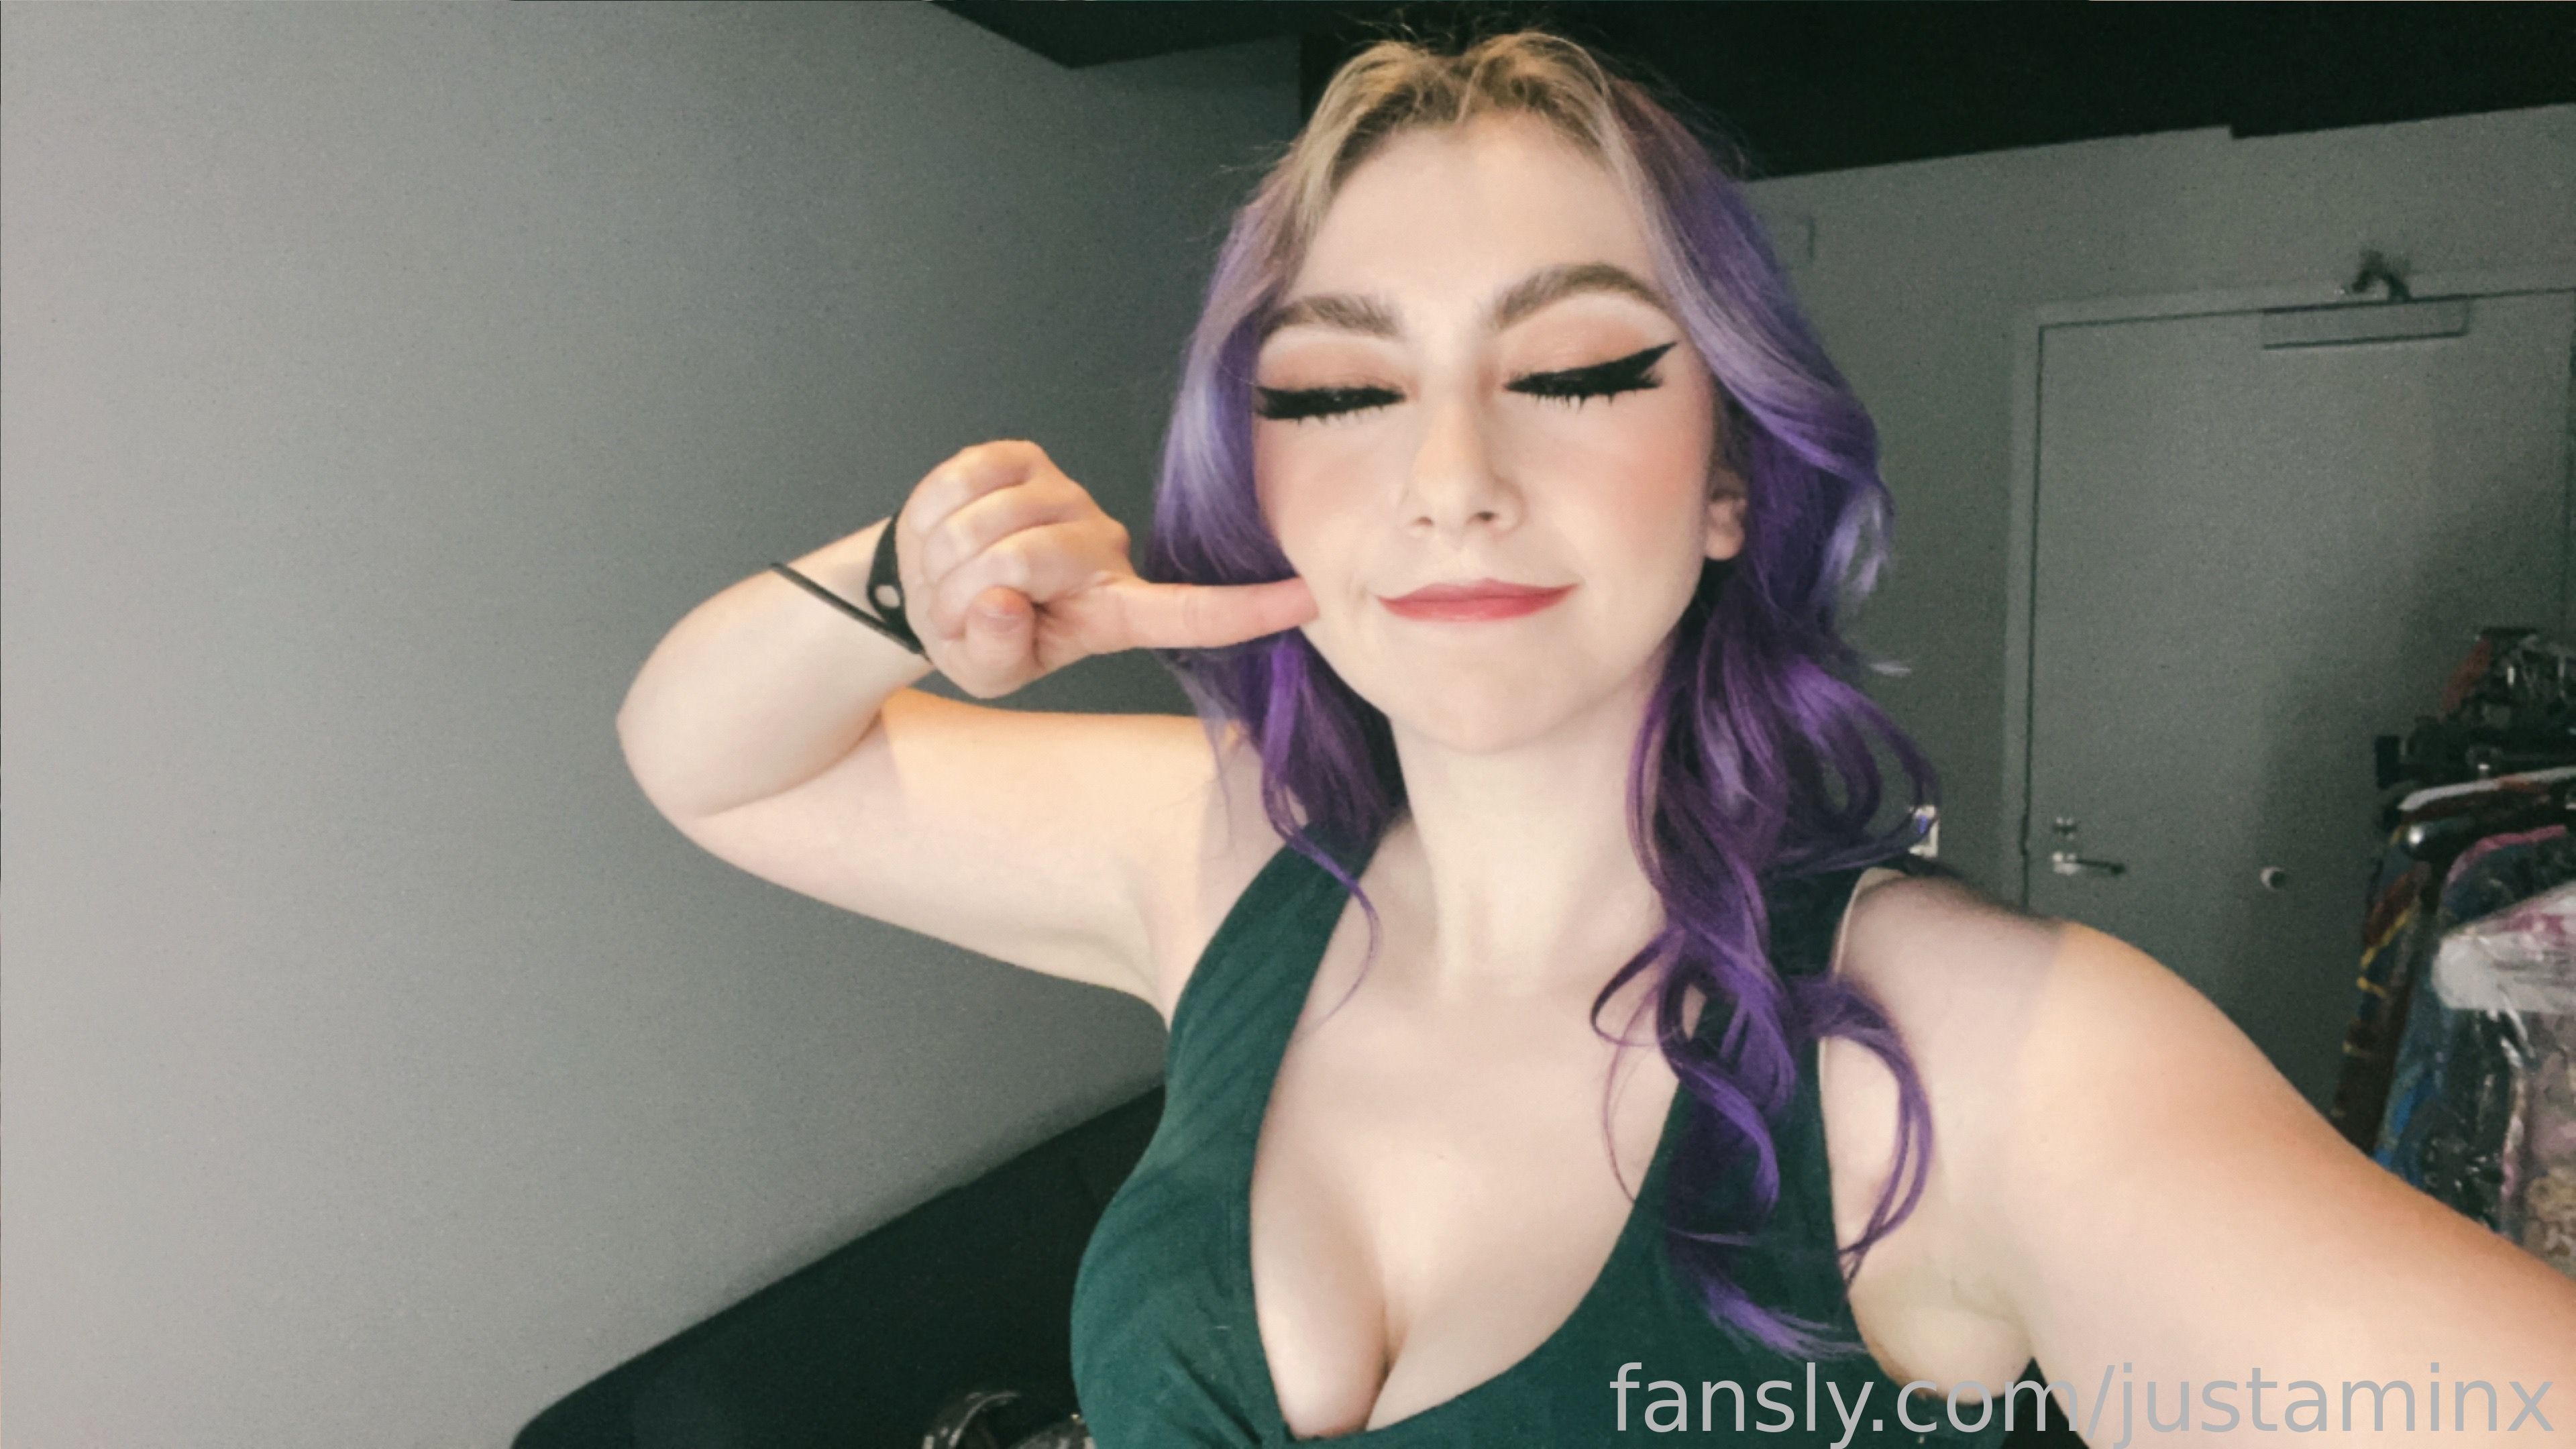 JustaMinx NSFW: What the Twitch Streamer Is Offering on Fansly